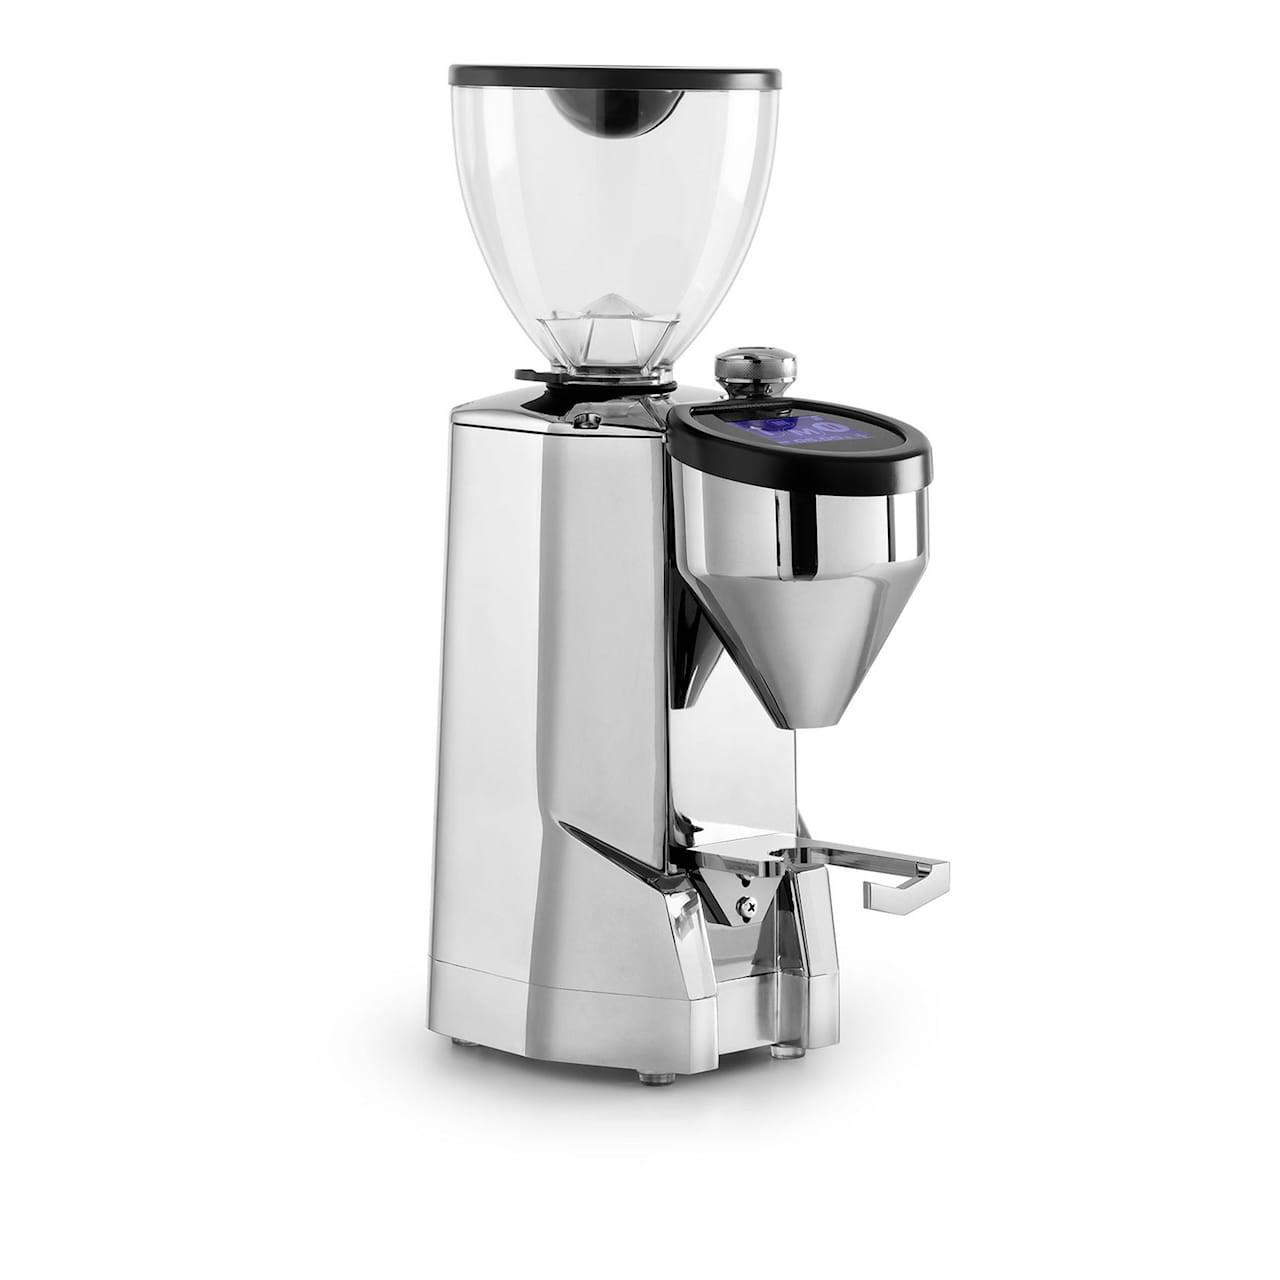 Super Fausto Coffee Grinder